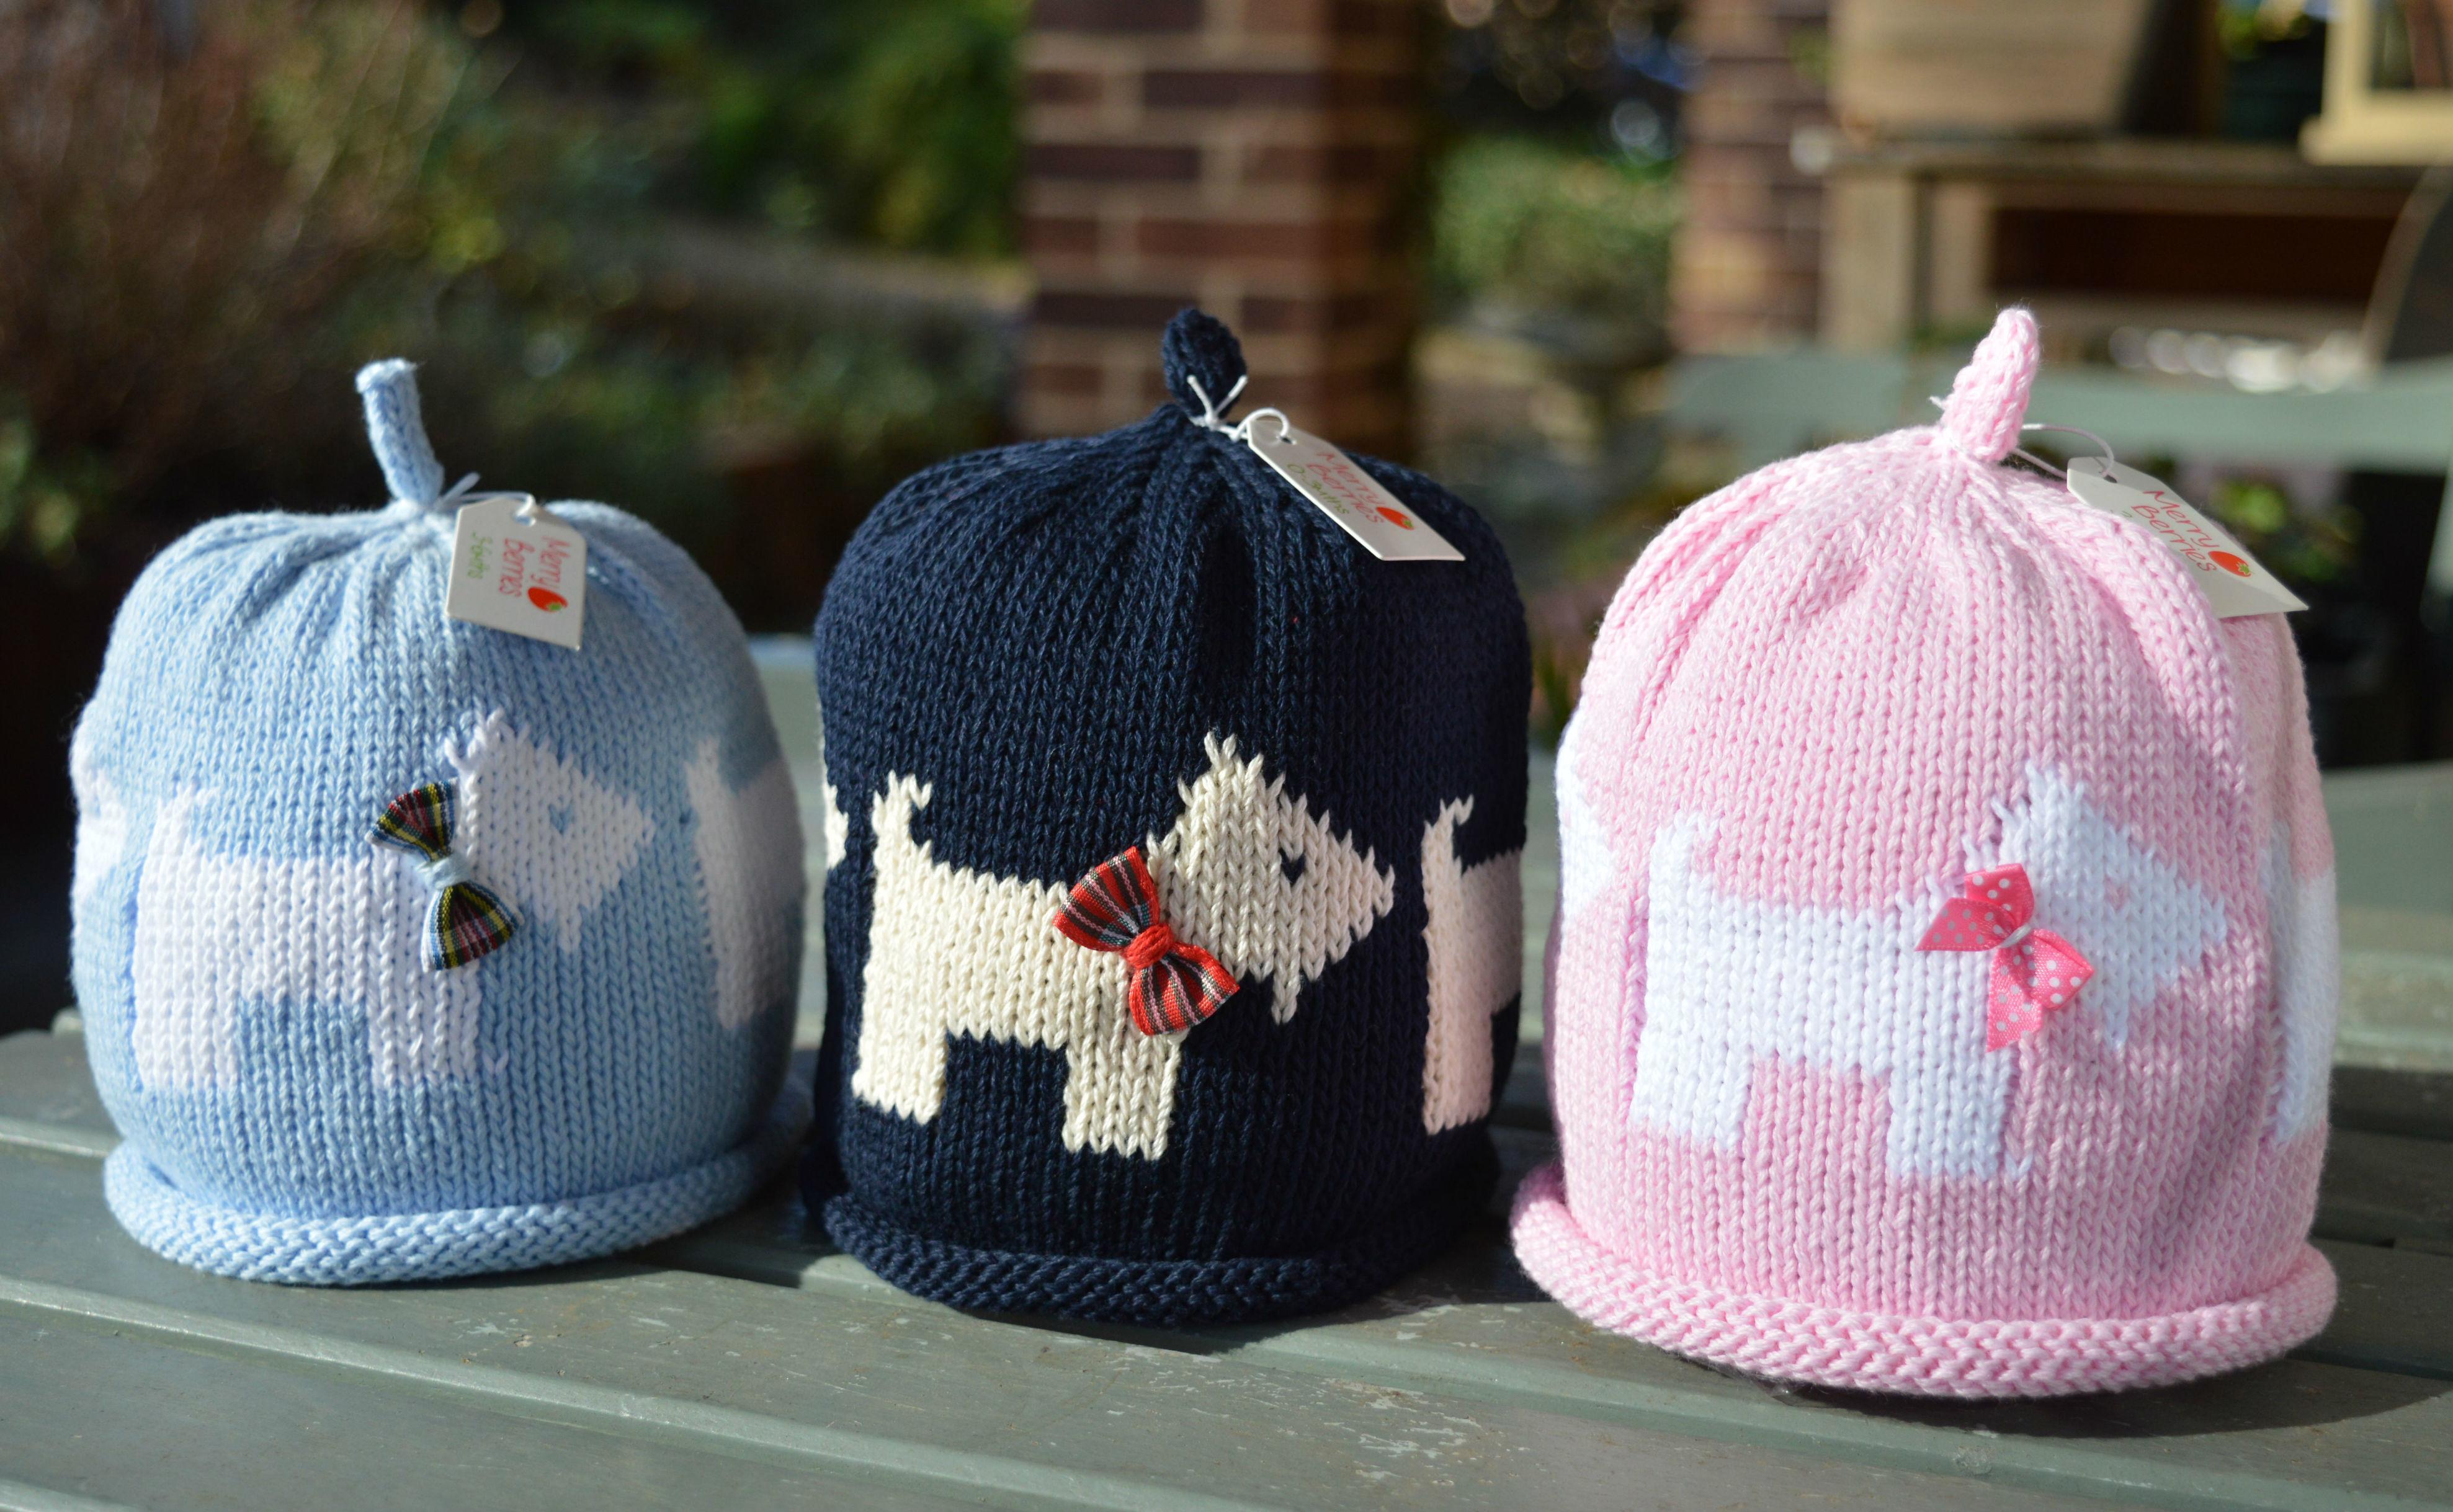 Navy cream =Scottie knitted baby hat. Available in 4 sizes- 0-3 months, 3-6 months, 6-12 months and 12-24 months. Knitted in the UK by Merry Berries in 100% cotton.-2